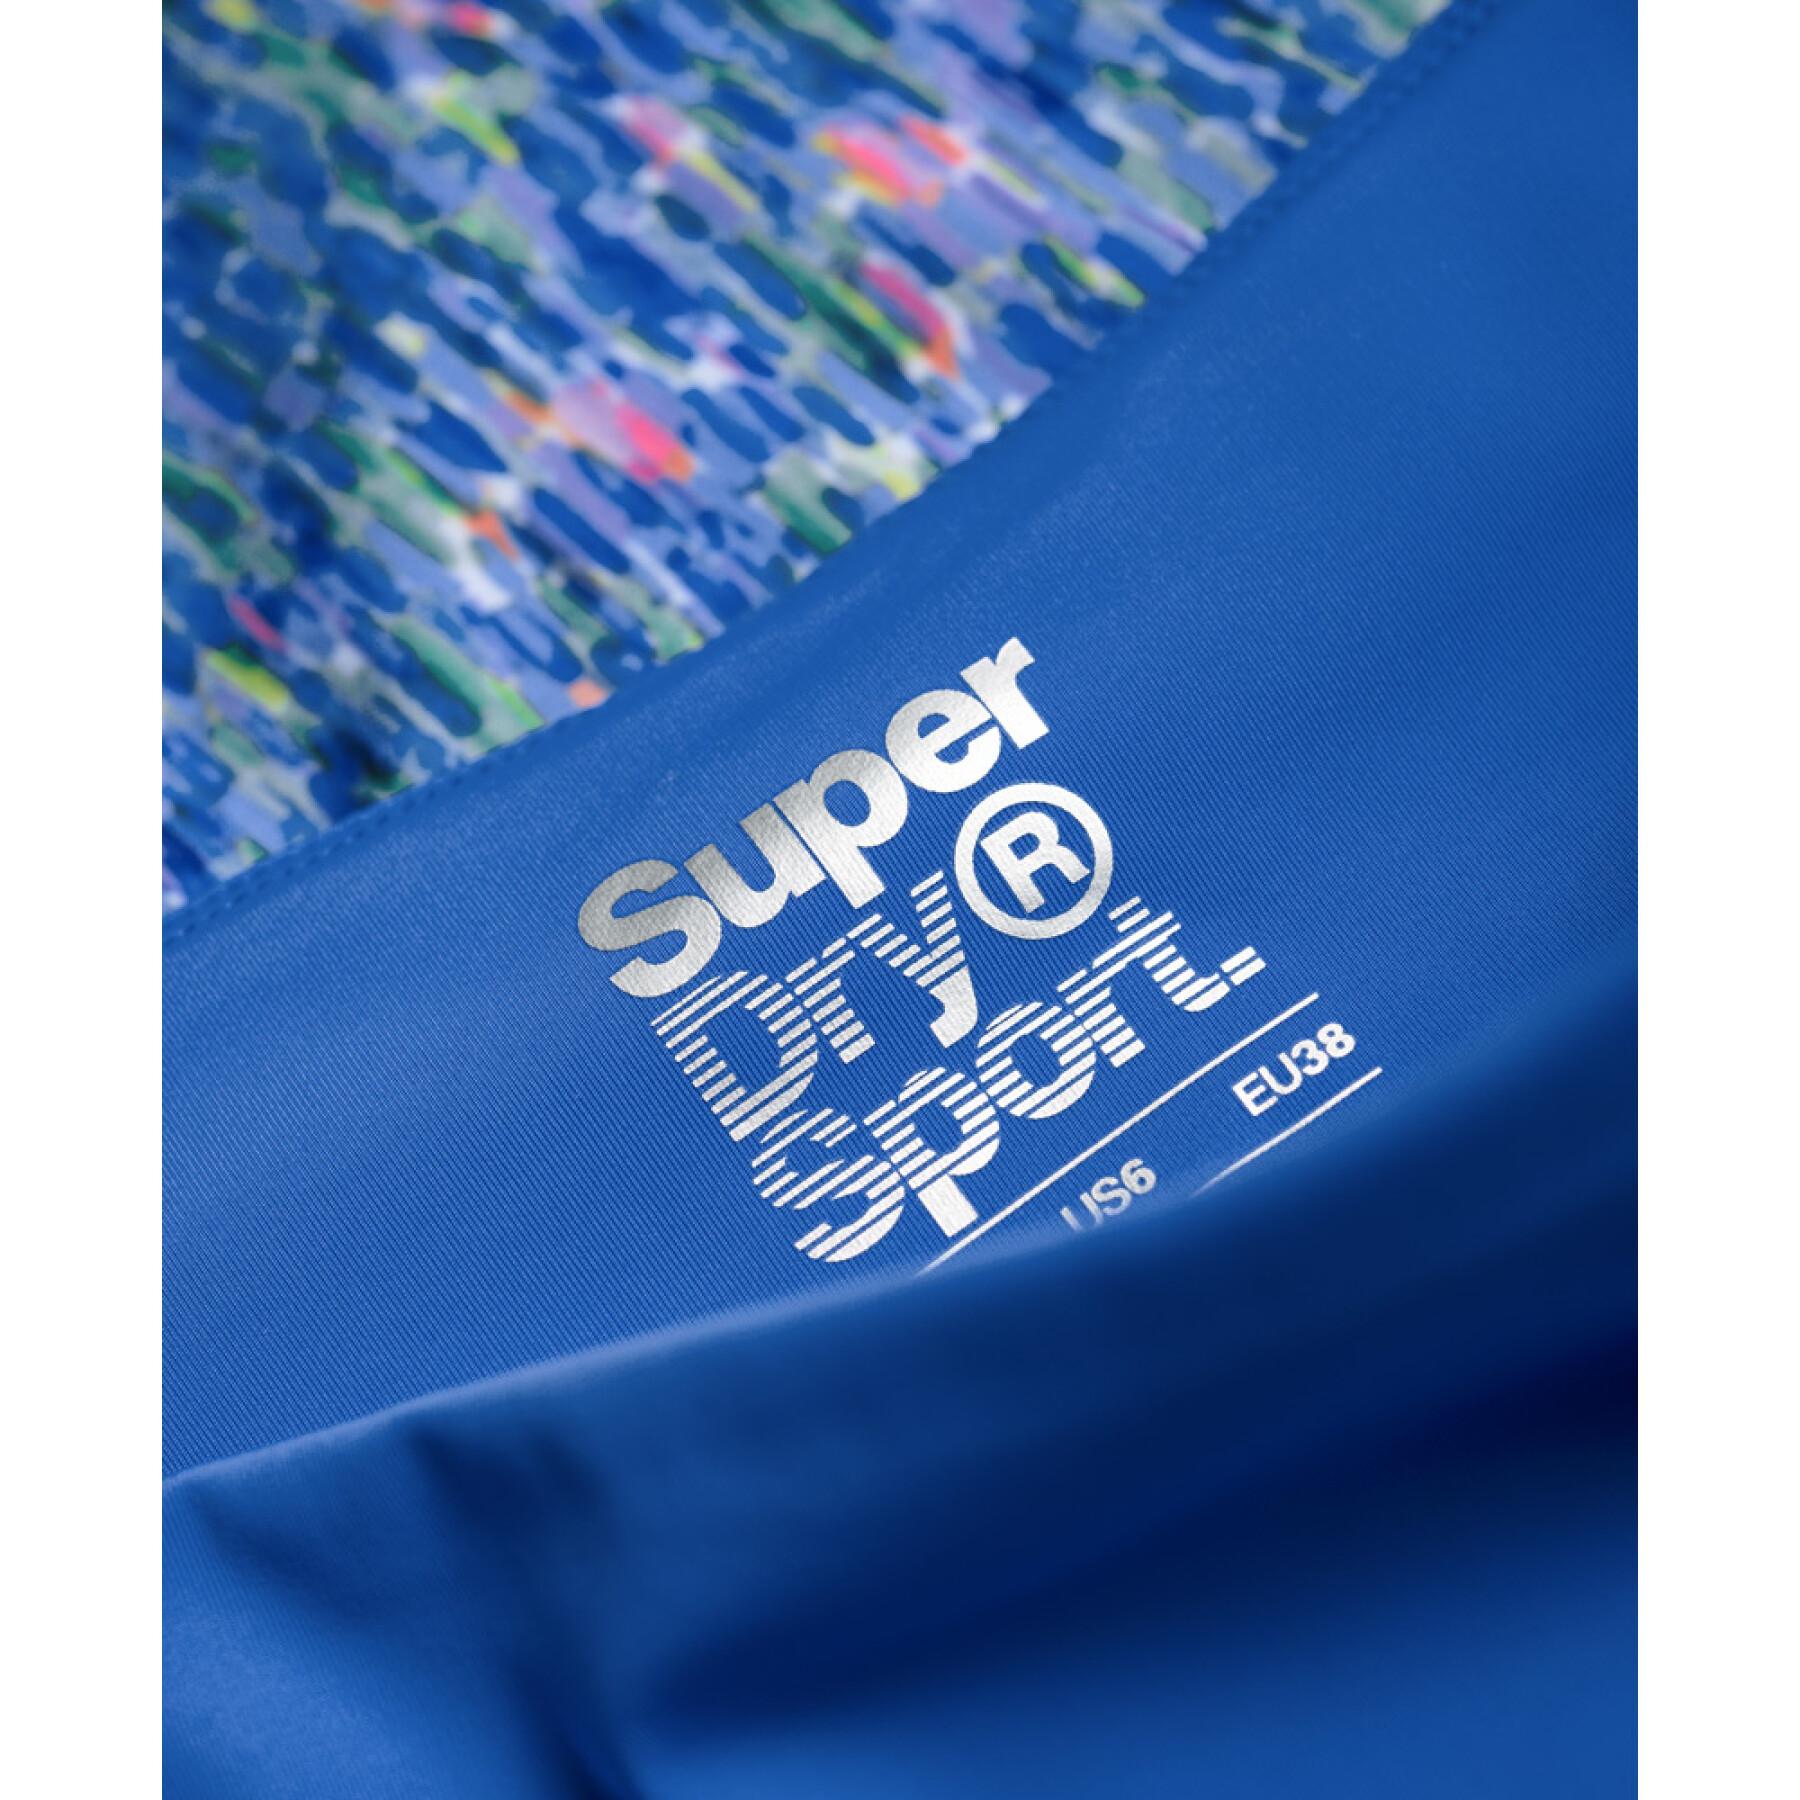 Women's shorts Superdry Active